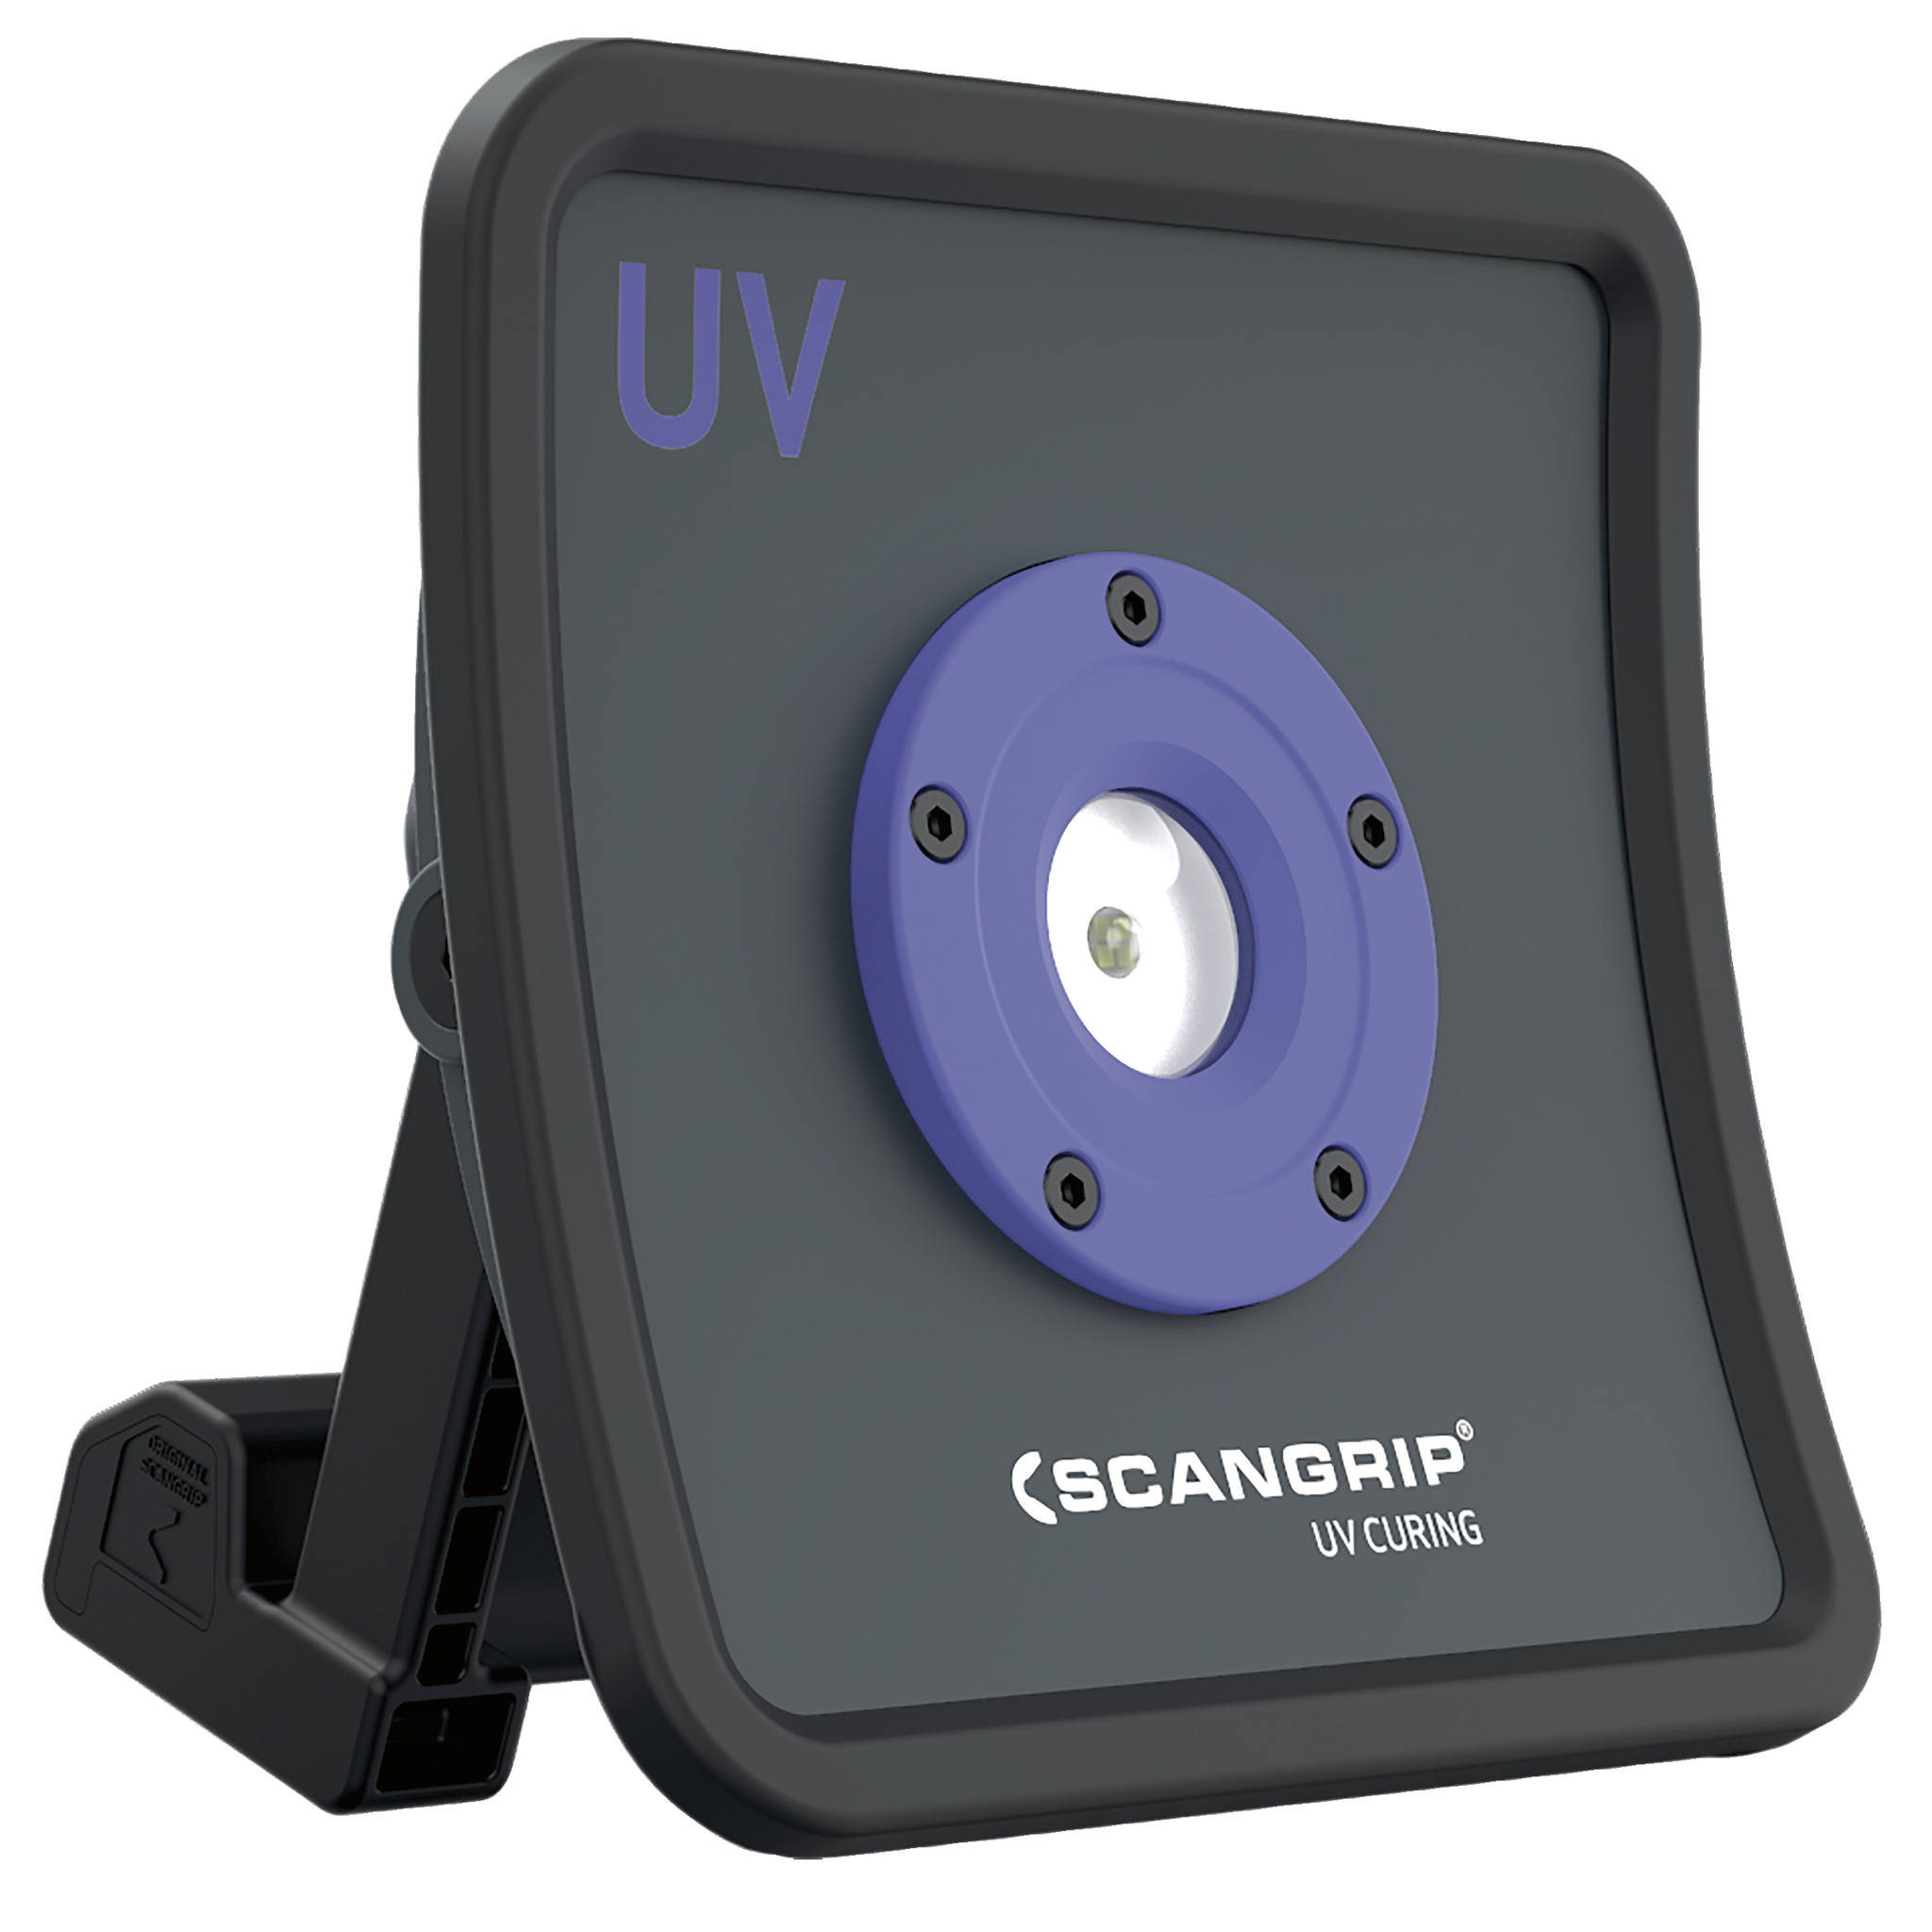 SCANGRIP UV-GUN extremely powerful LED work light for UV curing of large  sized paint repair, Exchangeable battery pack, Hand-held design